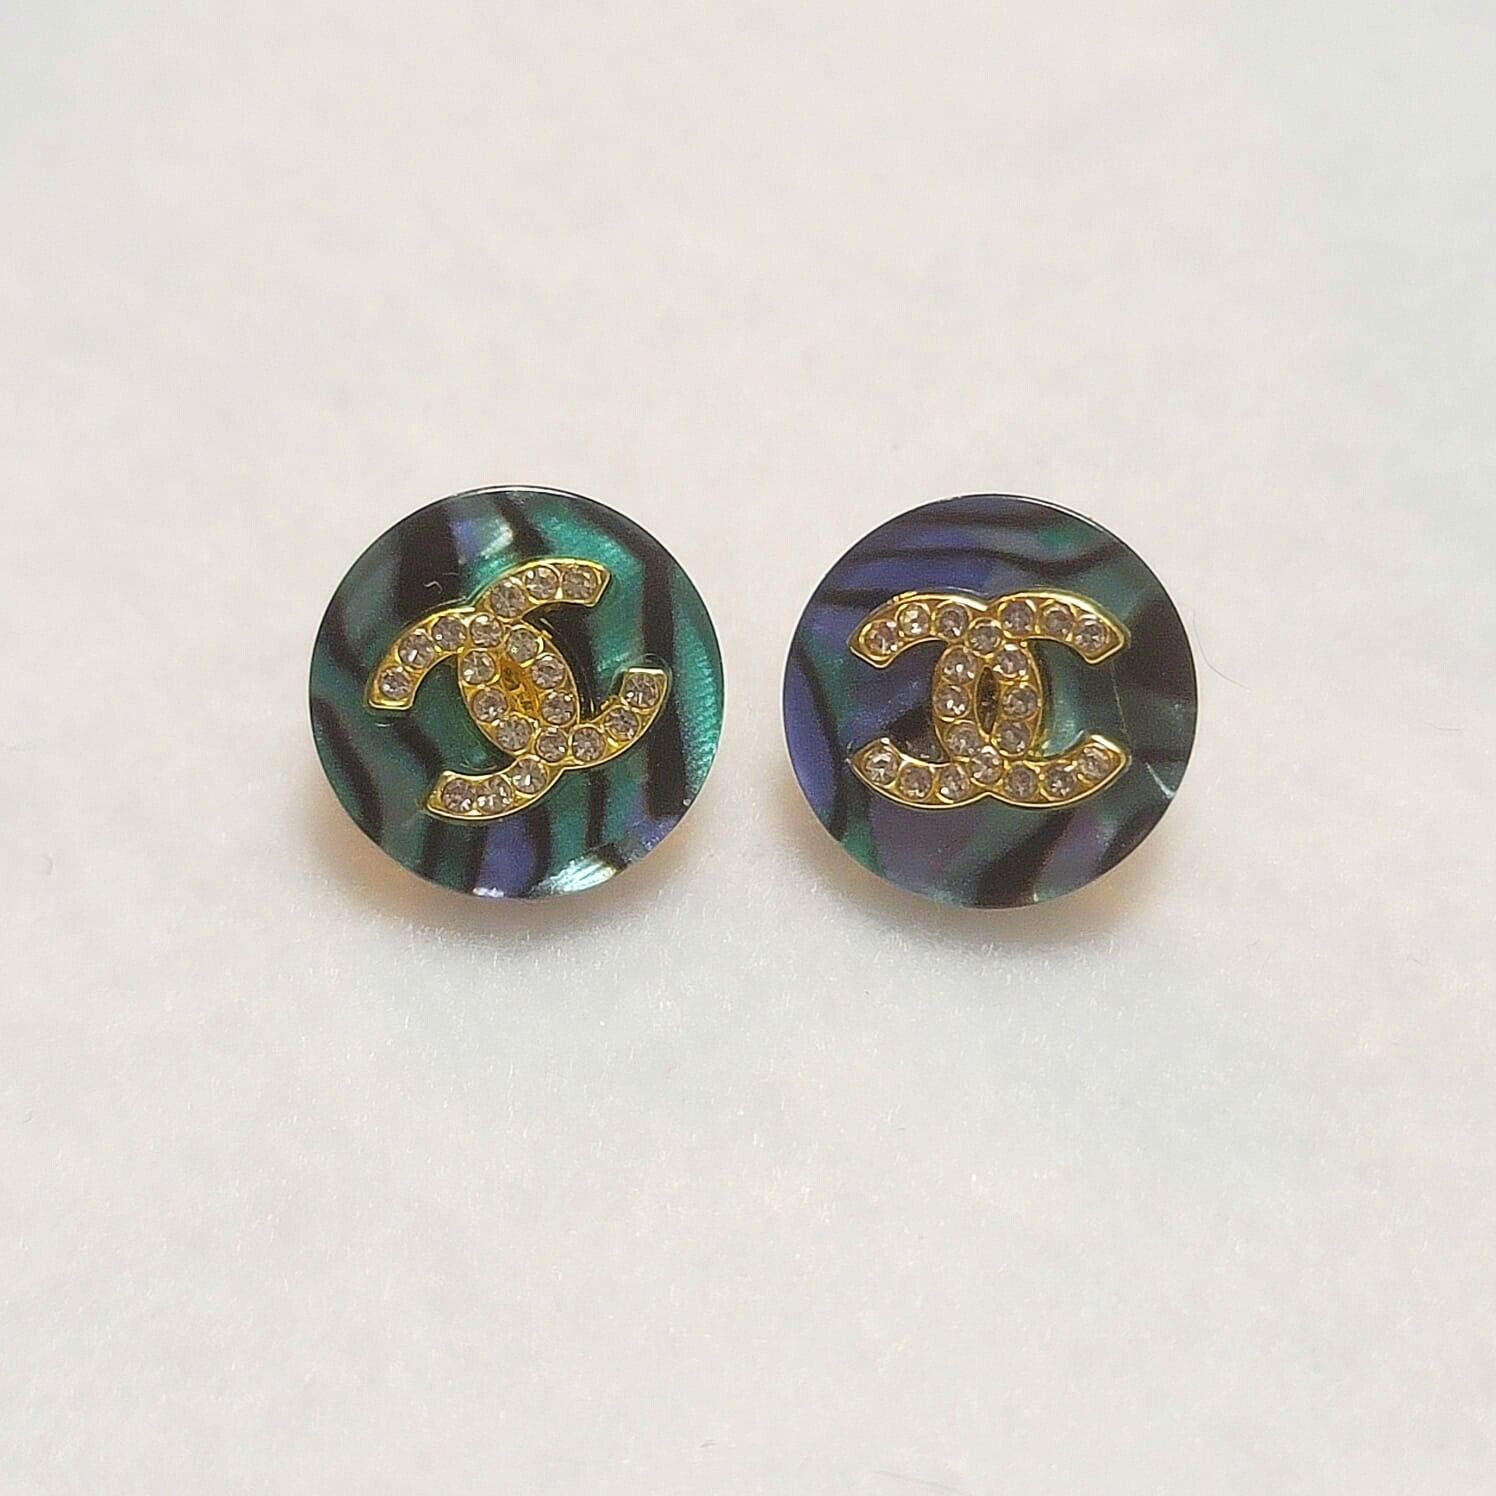 2pc Set 15mm Stamped Chanel Buttons